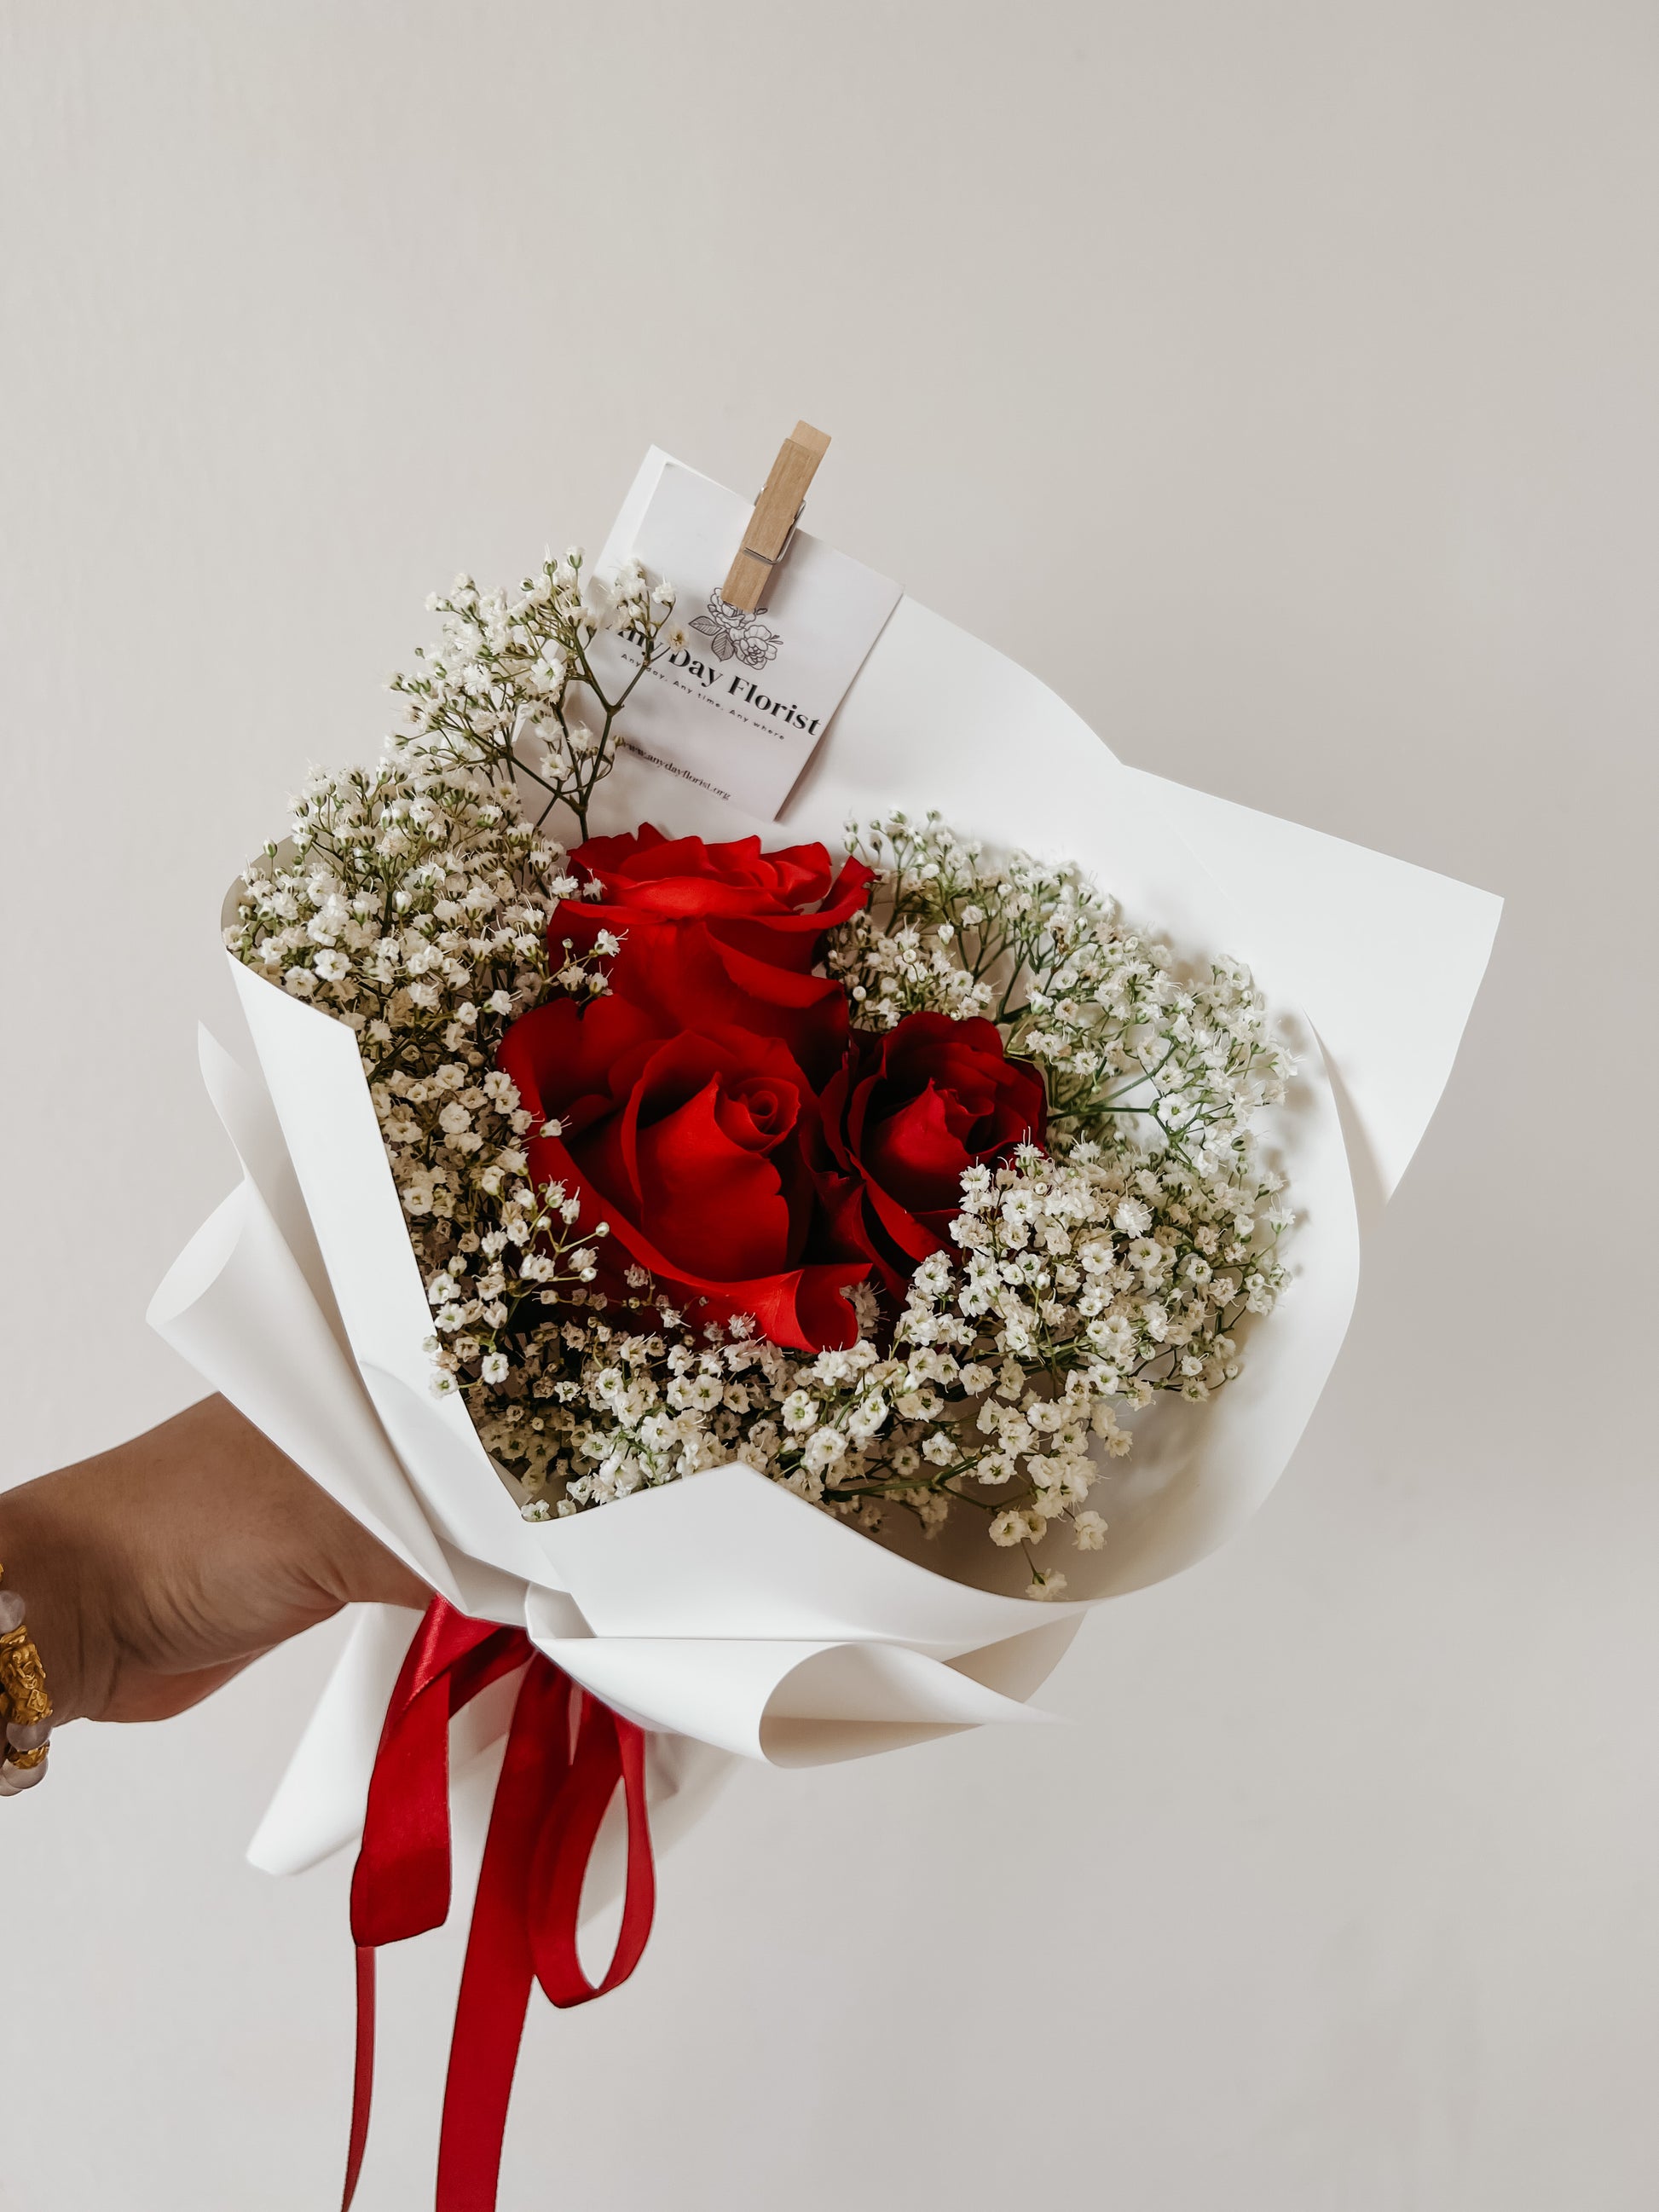 Any Day FloristRoses with baby's breath bouquet is an excellent choice for fresh flowers. The baby's breath adds a touch of innocence and purity to the arrangement.

Roses are one Rosie Baby Breathe Bouquet